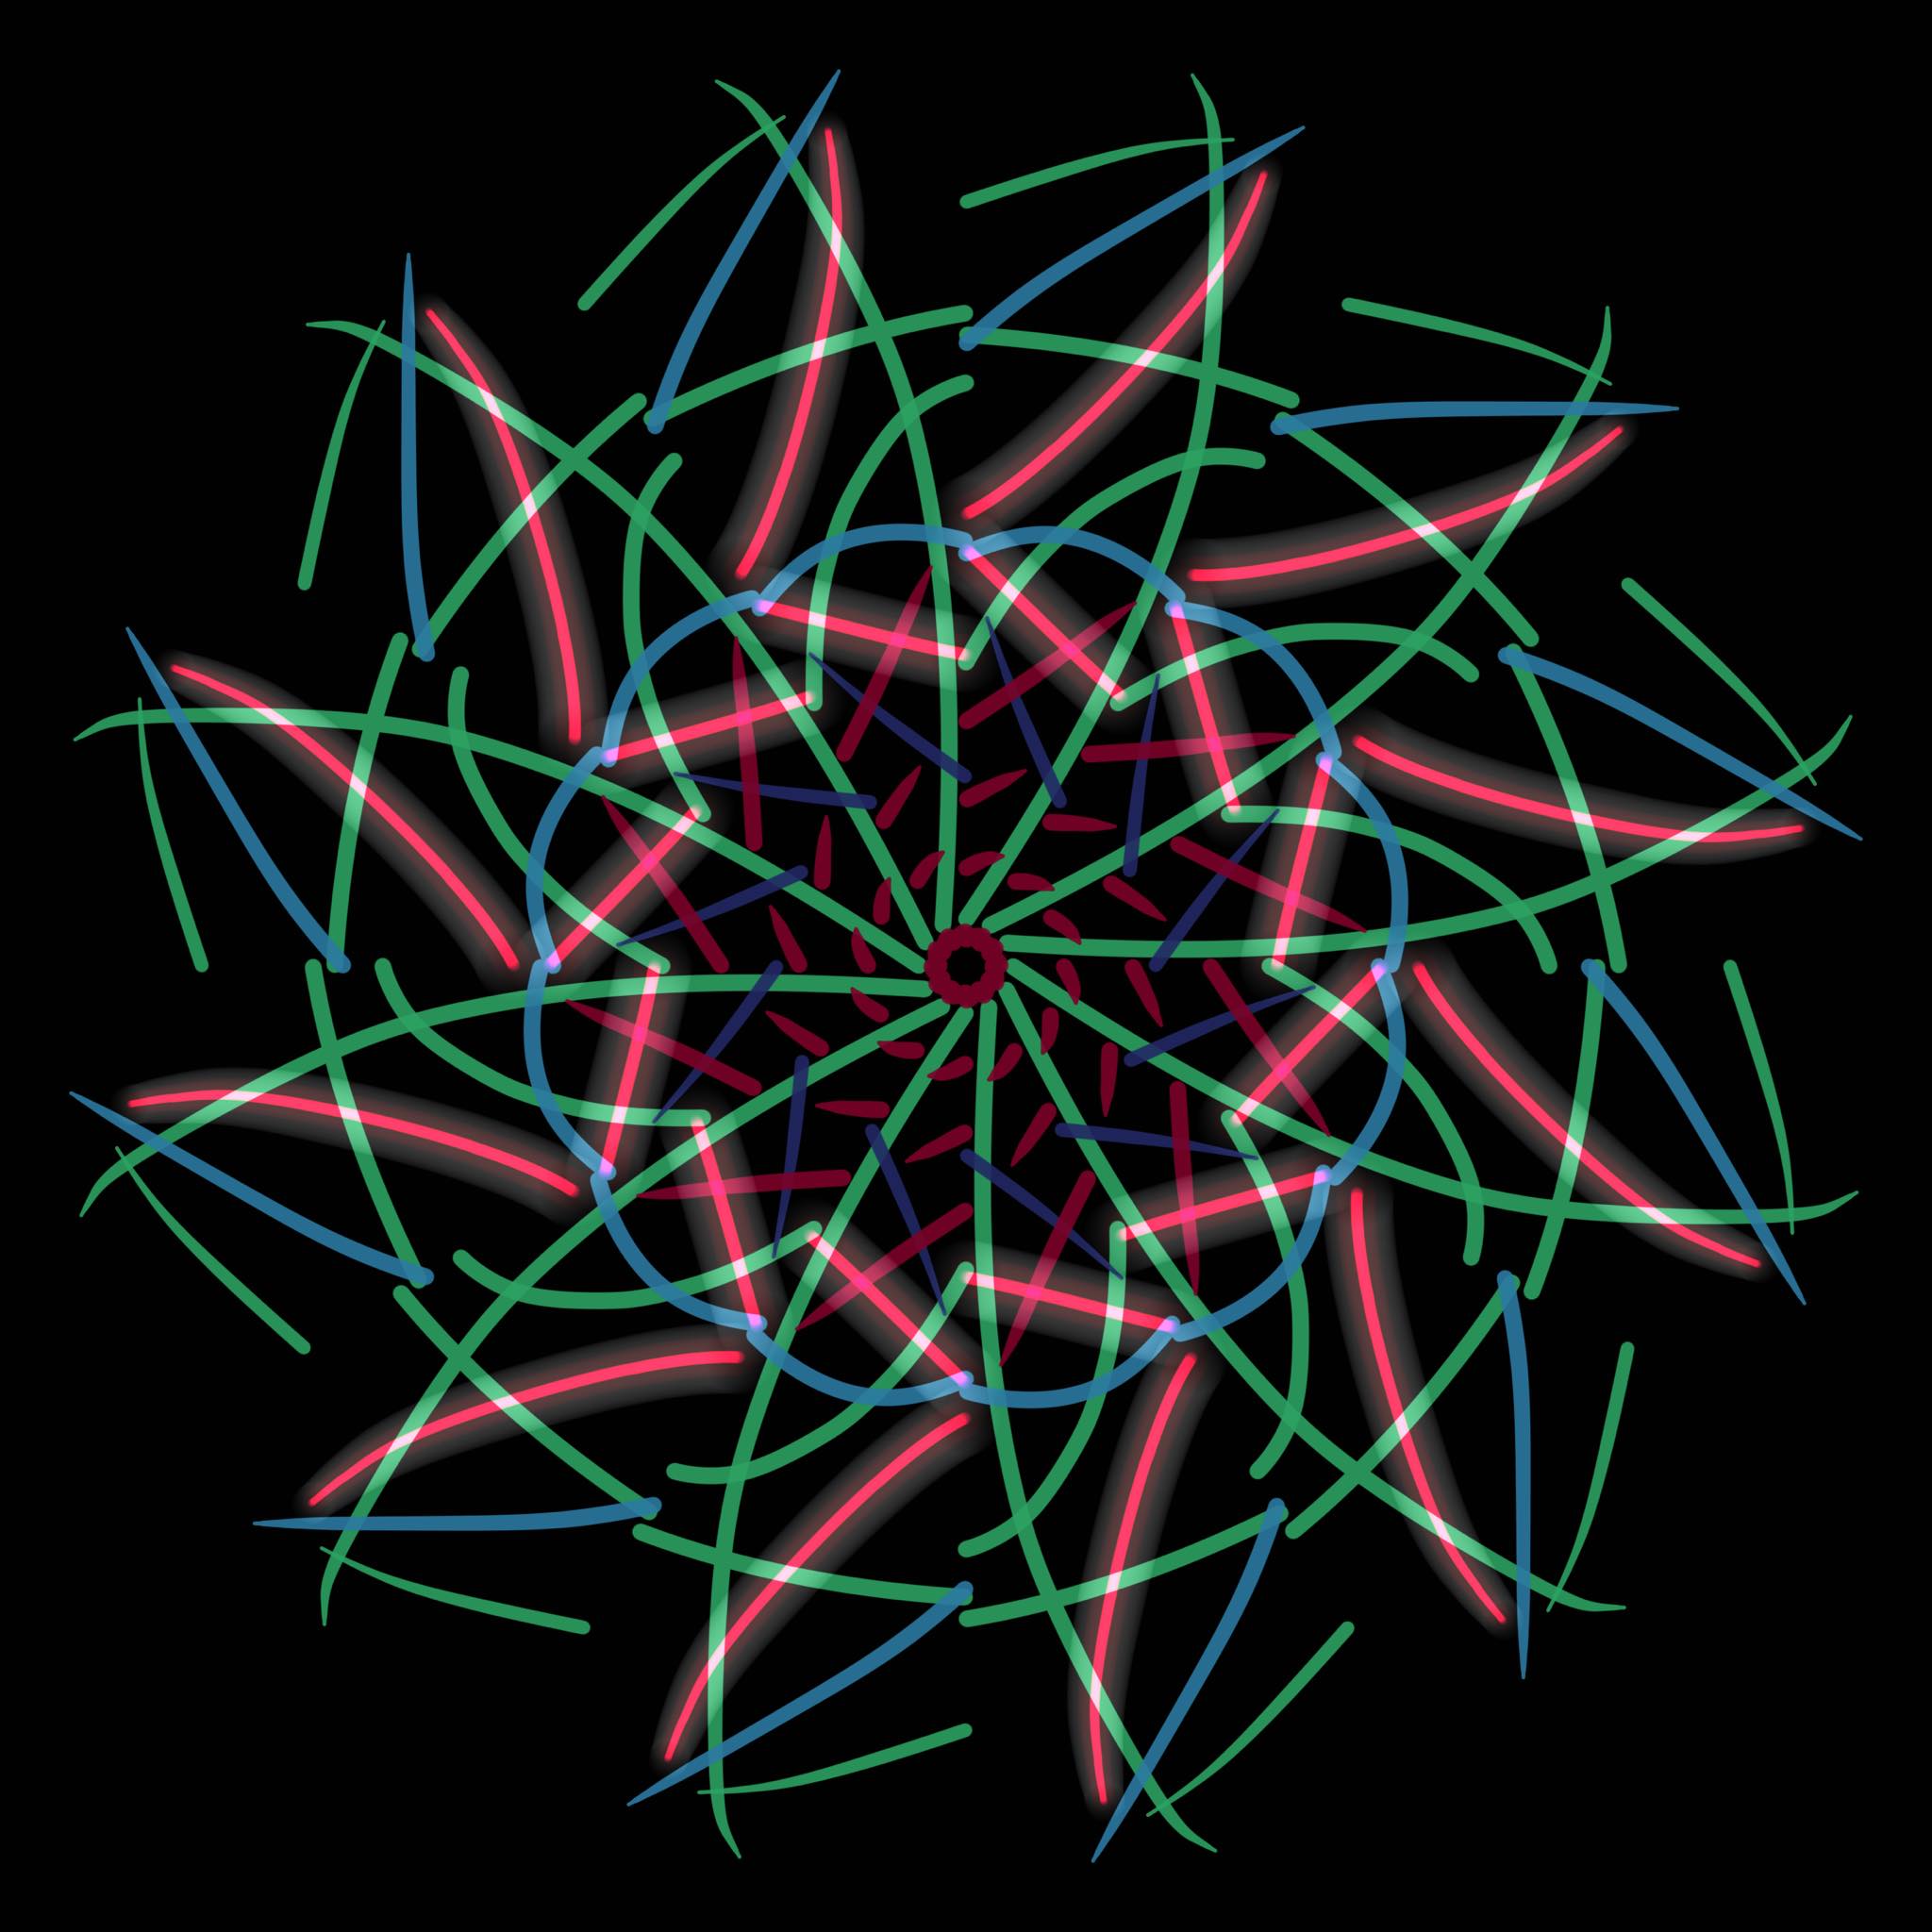 spirograph like with pinks, greens, and light blue